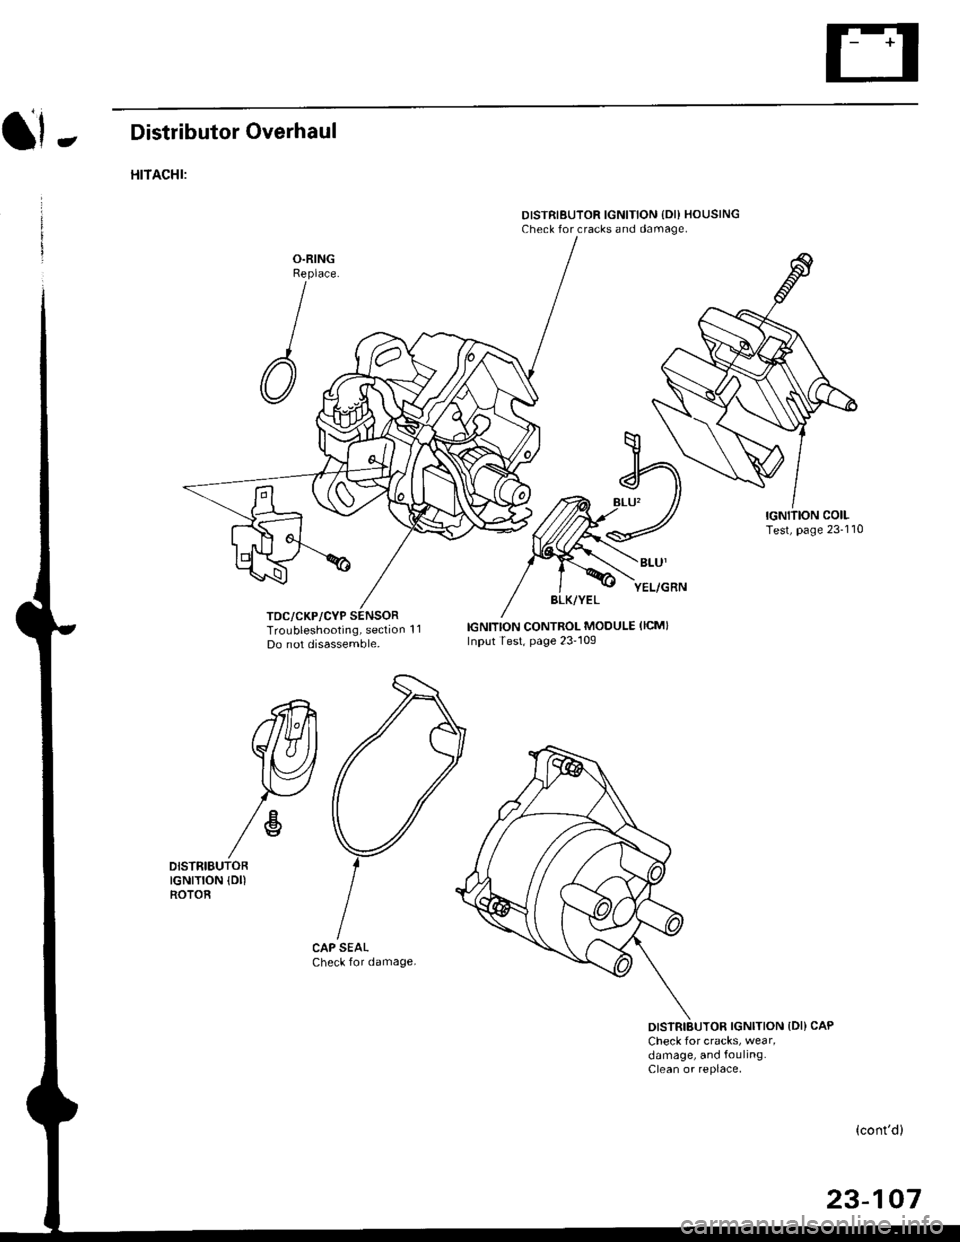 HONDA CIVIC 1998 6.G Owners Manual el -Distributor Overhaul
HITACHI:
TOC/CKP/CYP
DISTRIBUTOR IGNITION {DI} HOUSINGCheck for cracks and damage.
Troubleshooting, section 1 1
Do not disassemble.
CAP SEALCheck for damage.
IGNITION CONTROL 